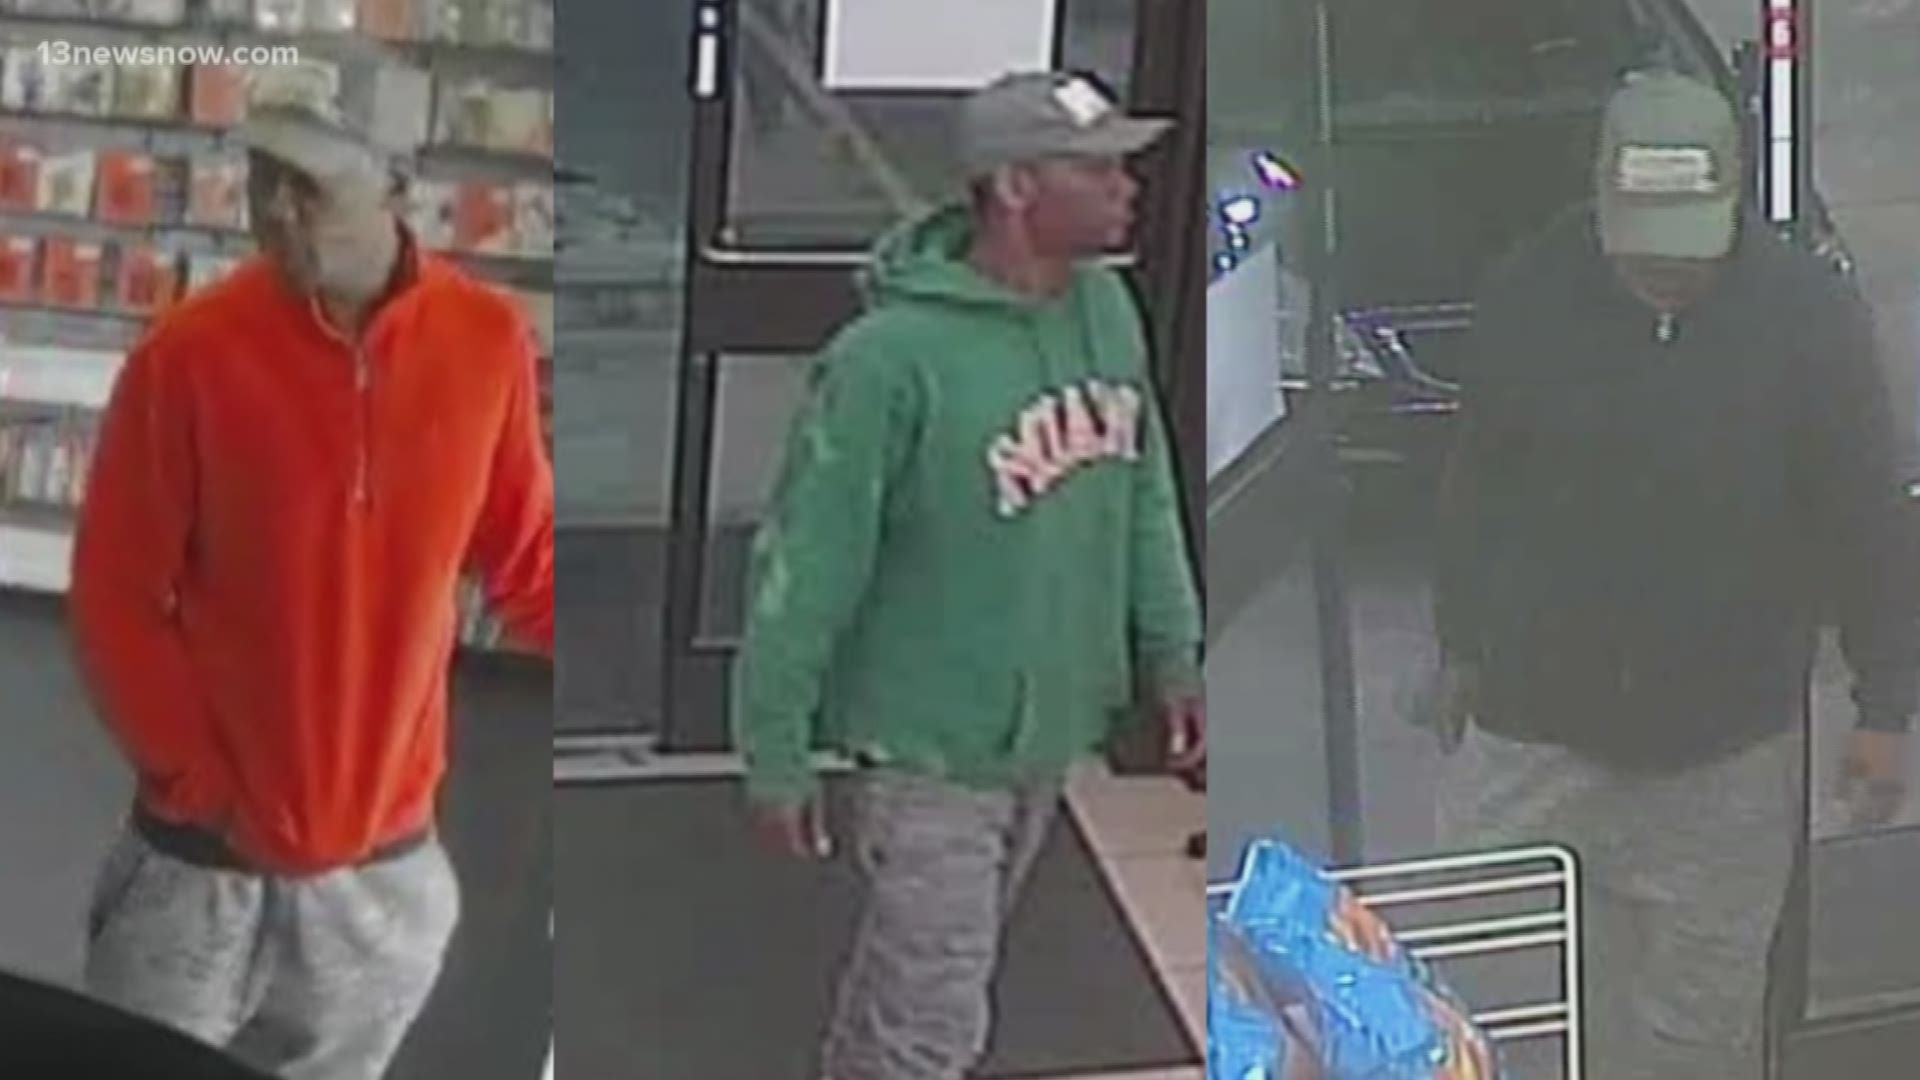 The same man is suspected of robbing Old Skool Games on Portsmouth Boulevard and two 7-Elevens. Now police are asking for your help to identify him.